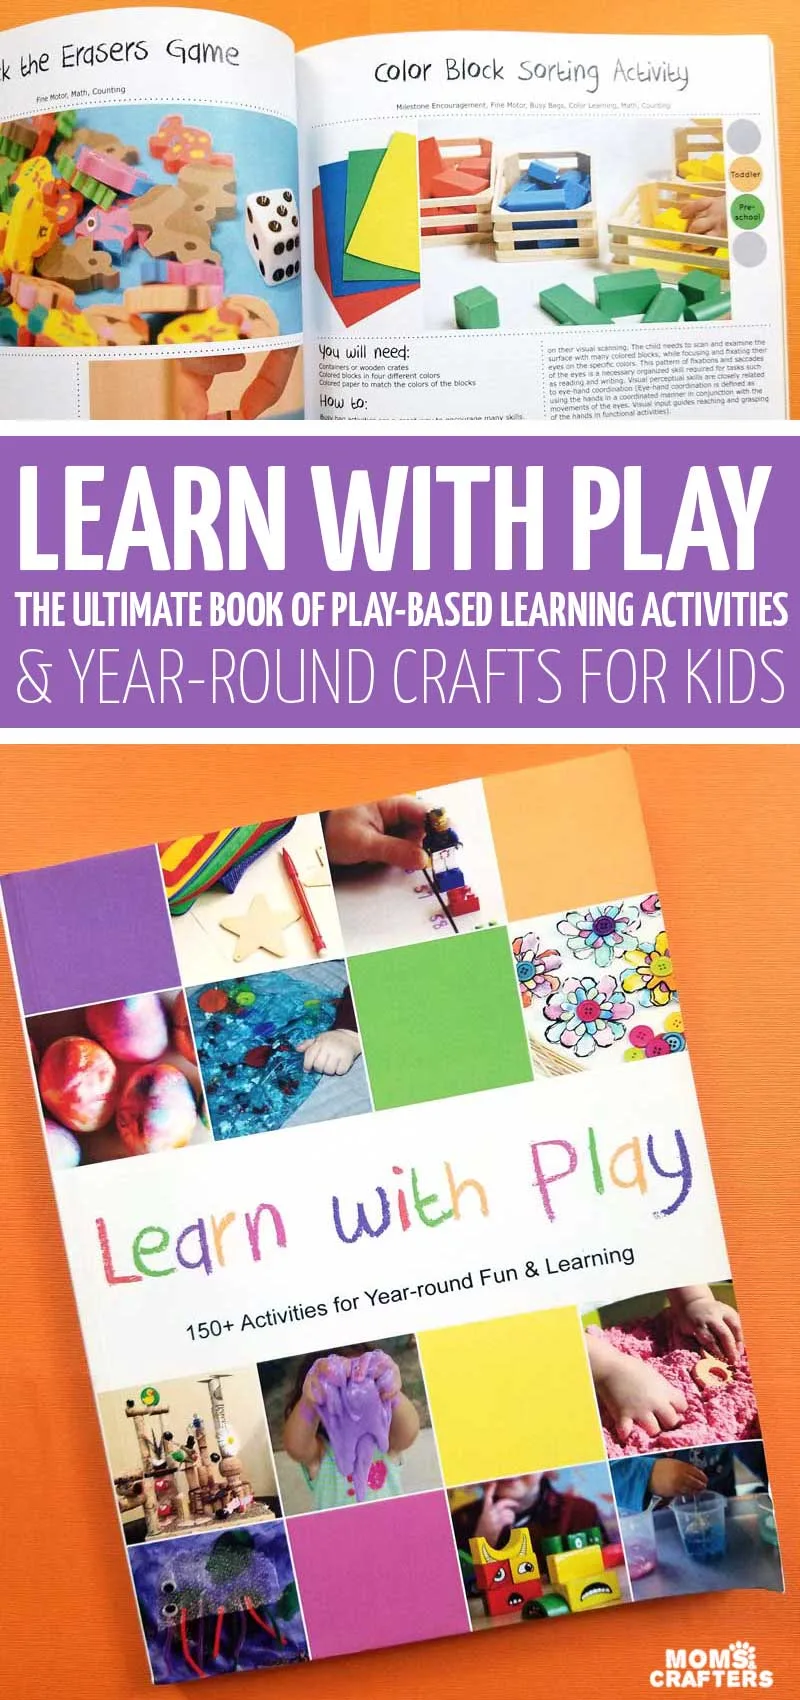 Click to learn more about this amazing, ginormous kids activities book full of fun ideas for learning with play including homeschooling, sensory play, toddler activities, preschool crafts, science, and more boredom busters and educational ideas. 